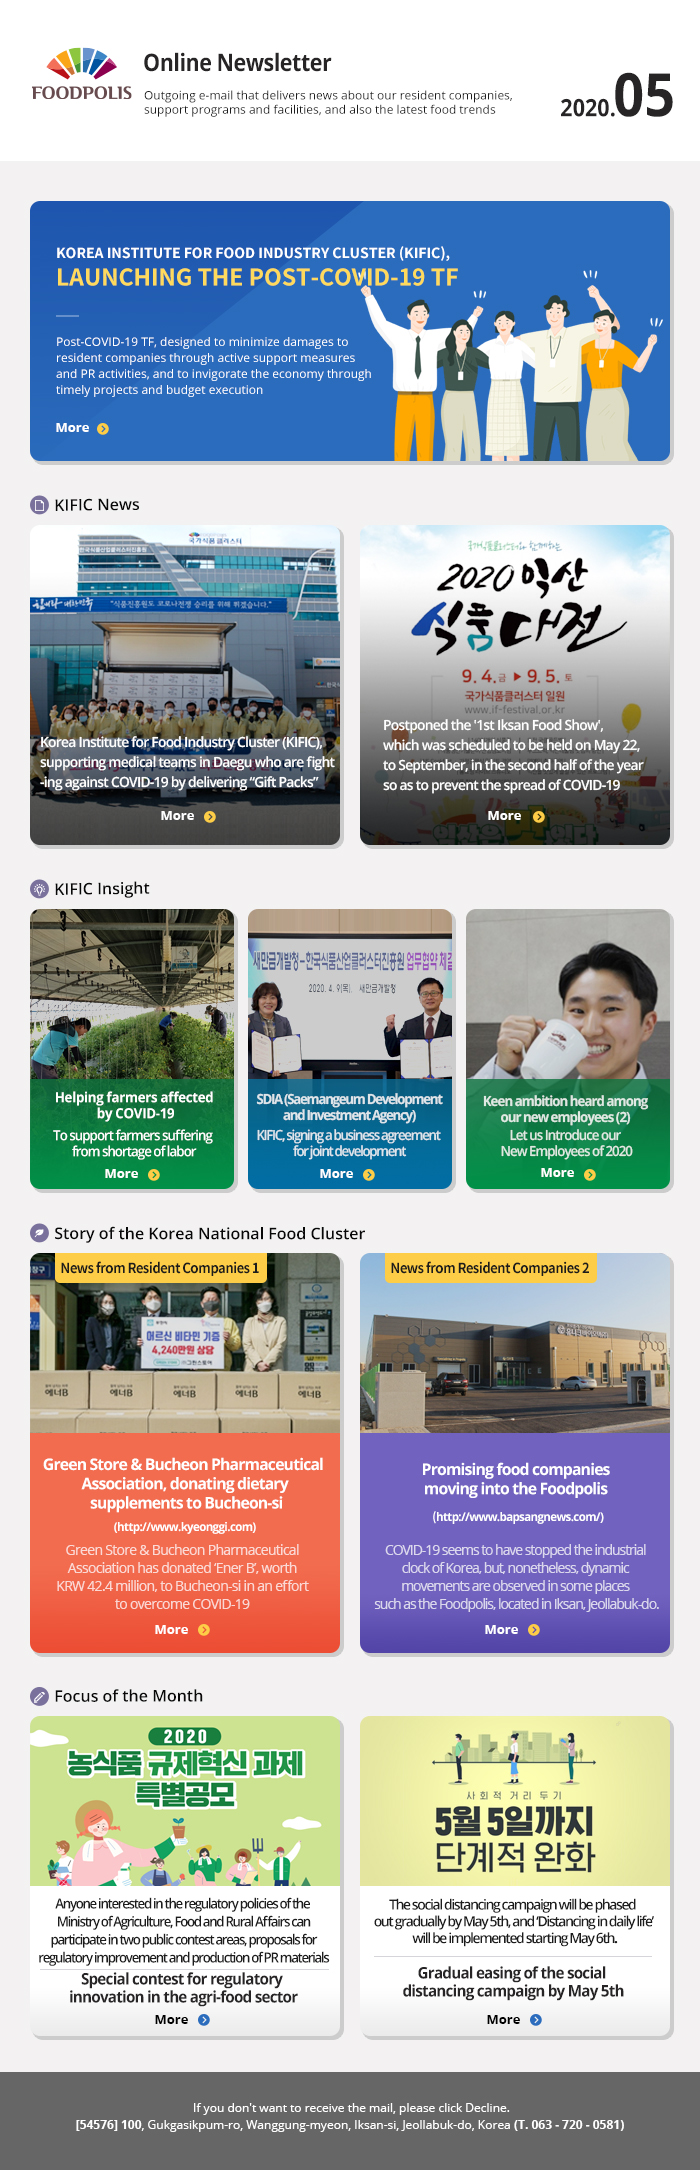 2020 May News Letter from the Korea National Food Cluster